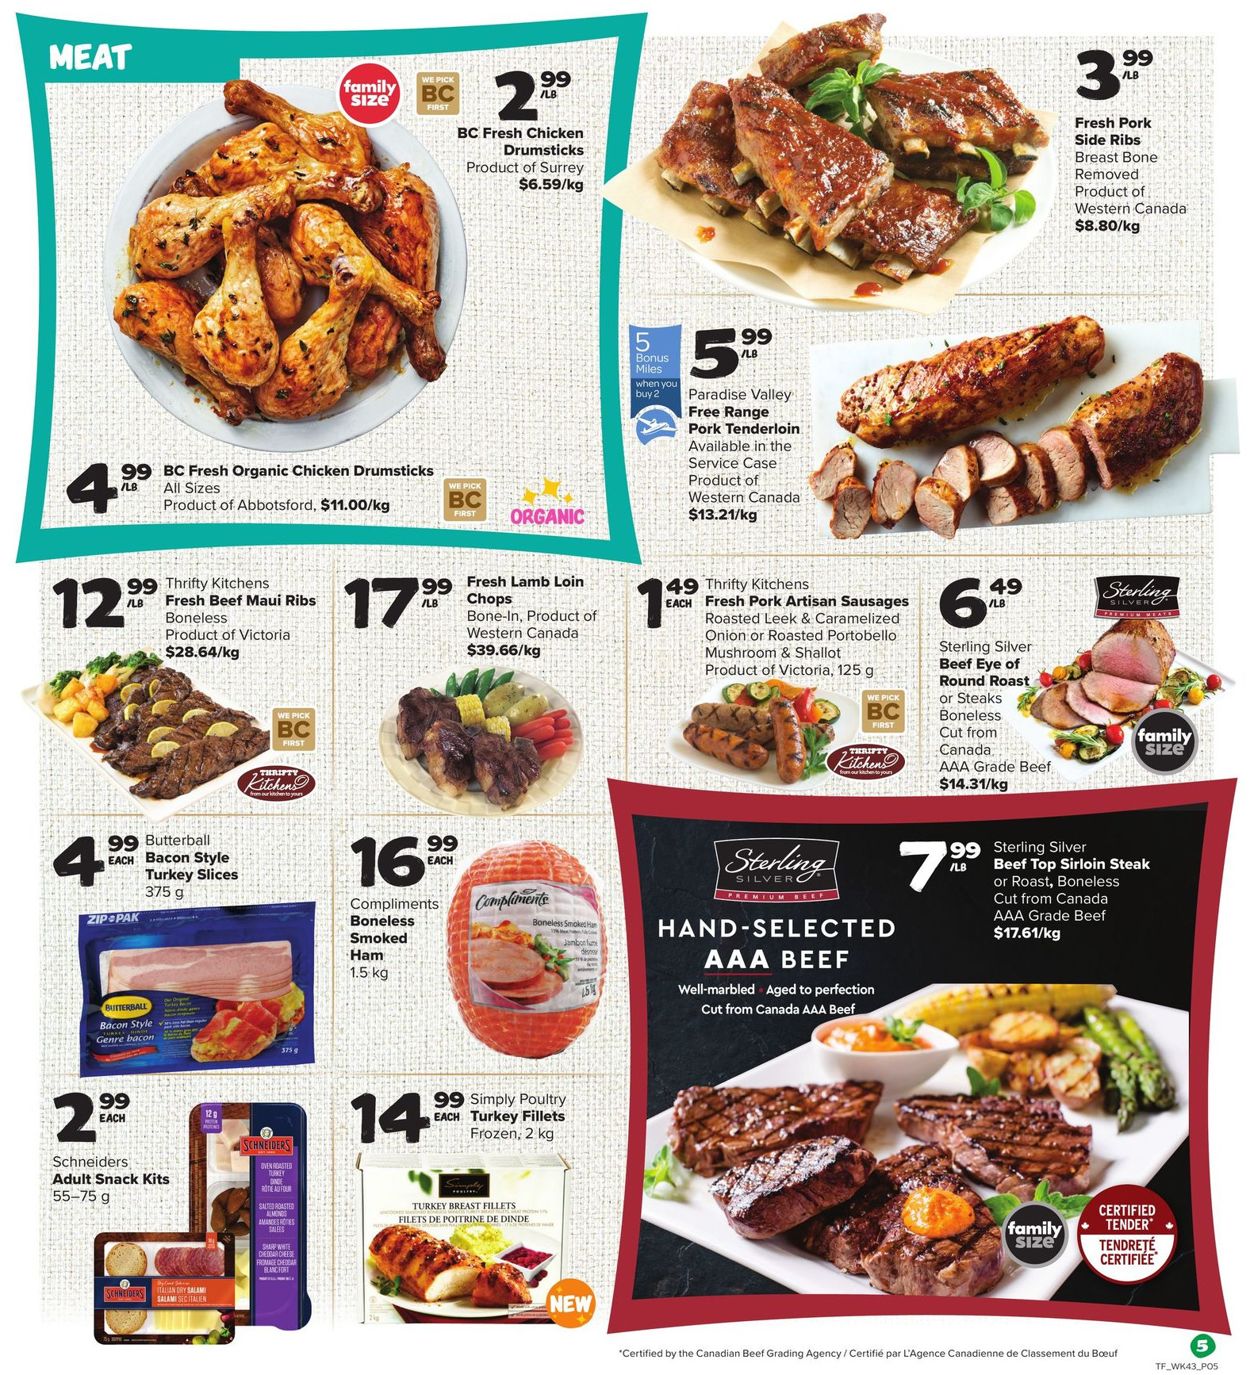 Thrifty Foods Flyer from 02/17/2022